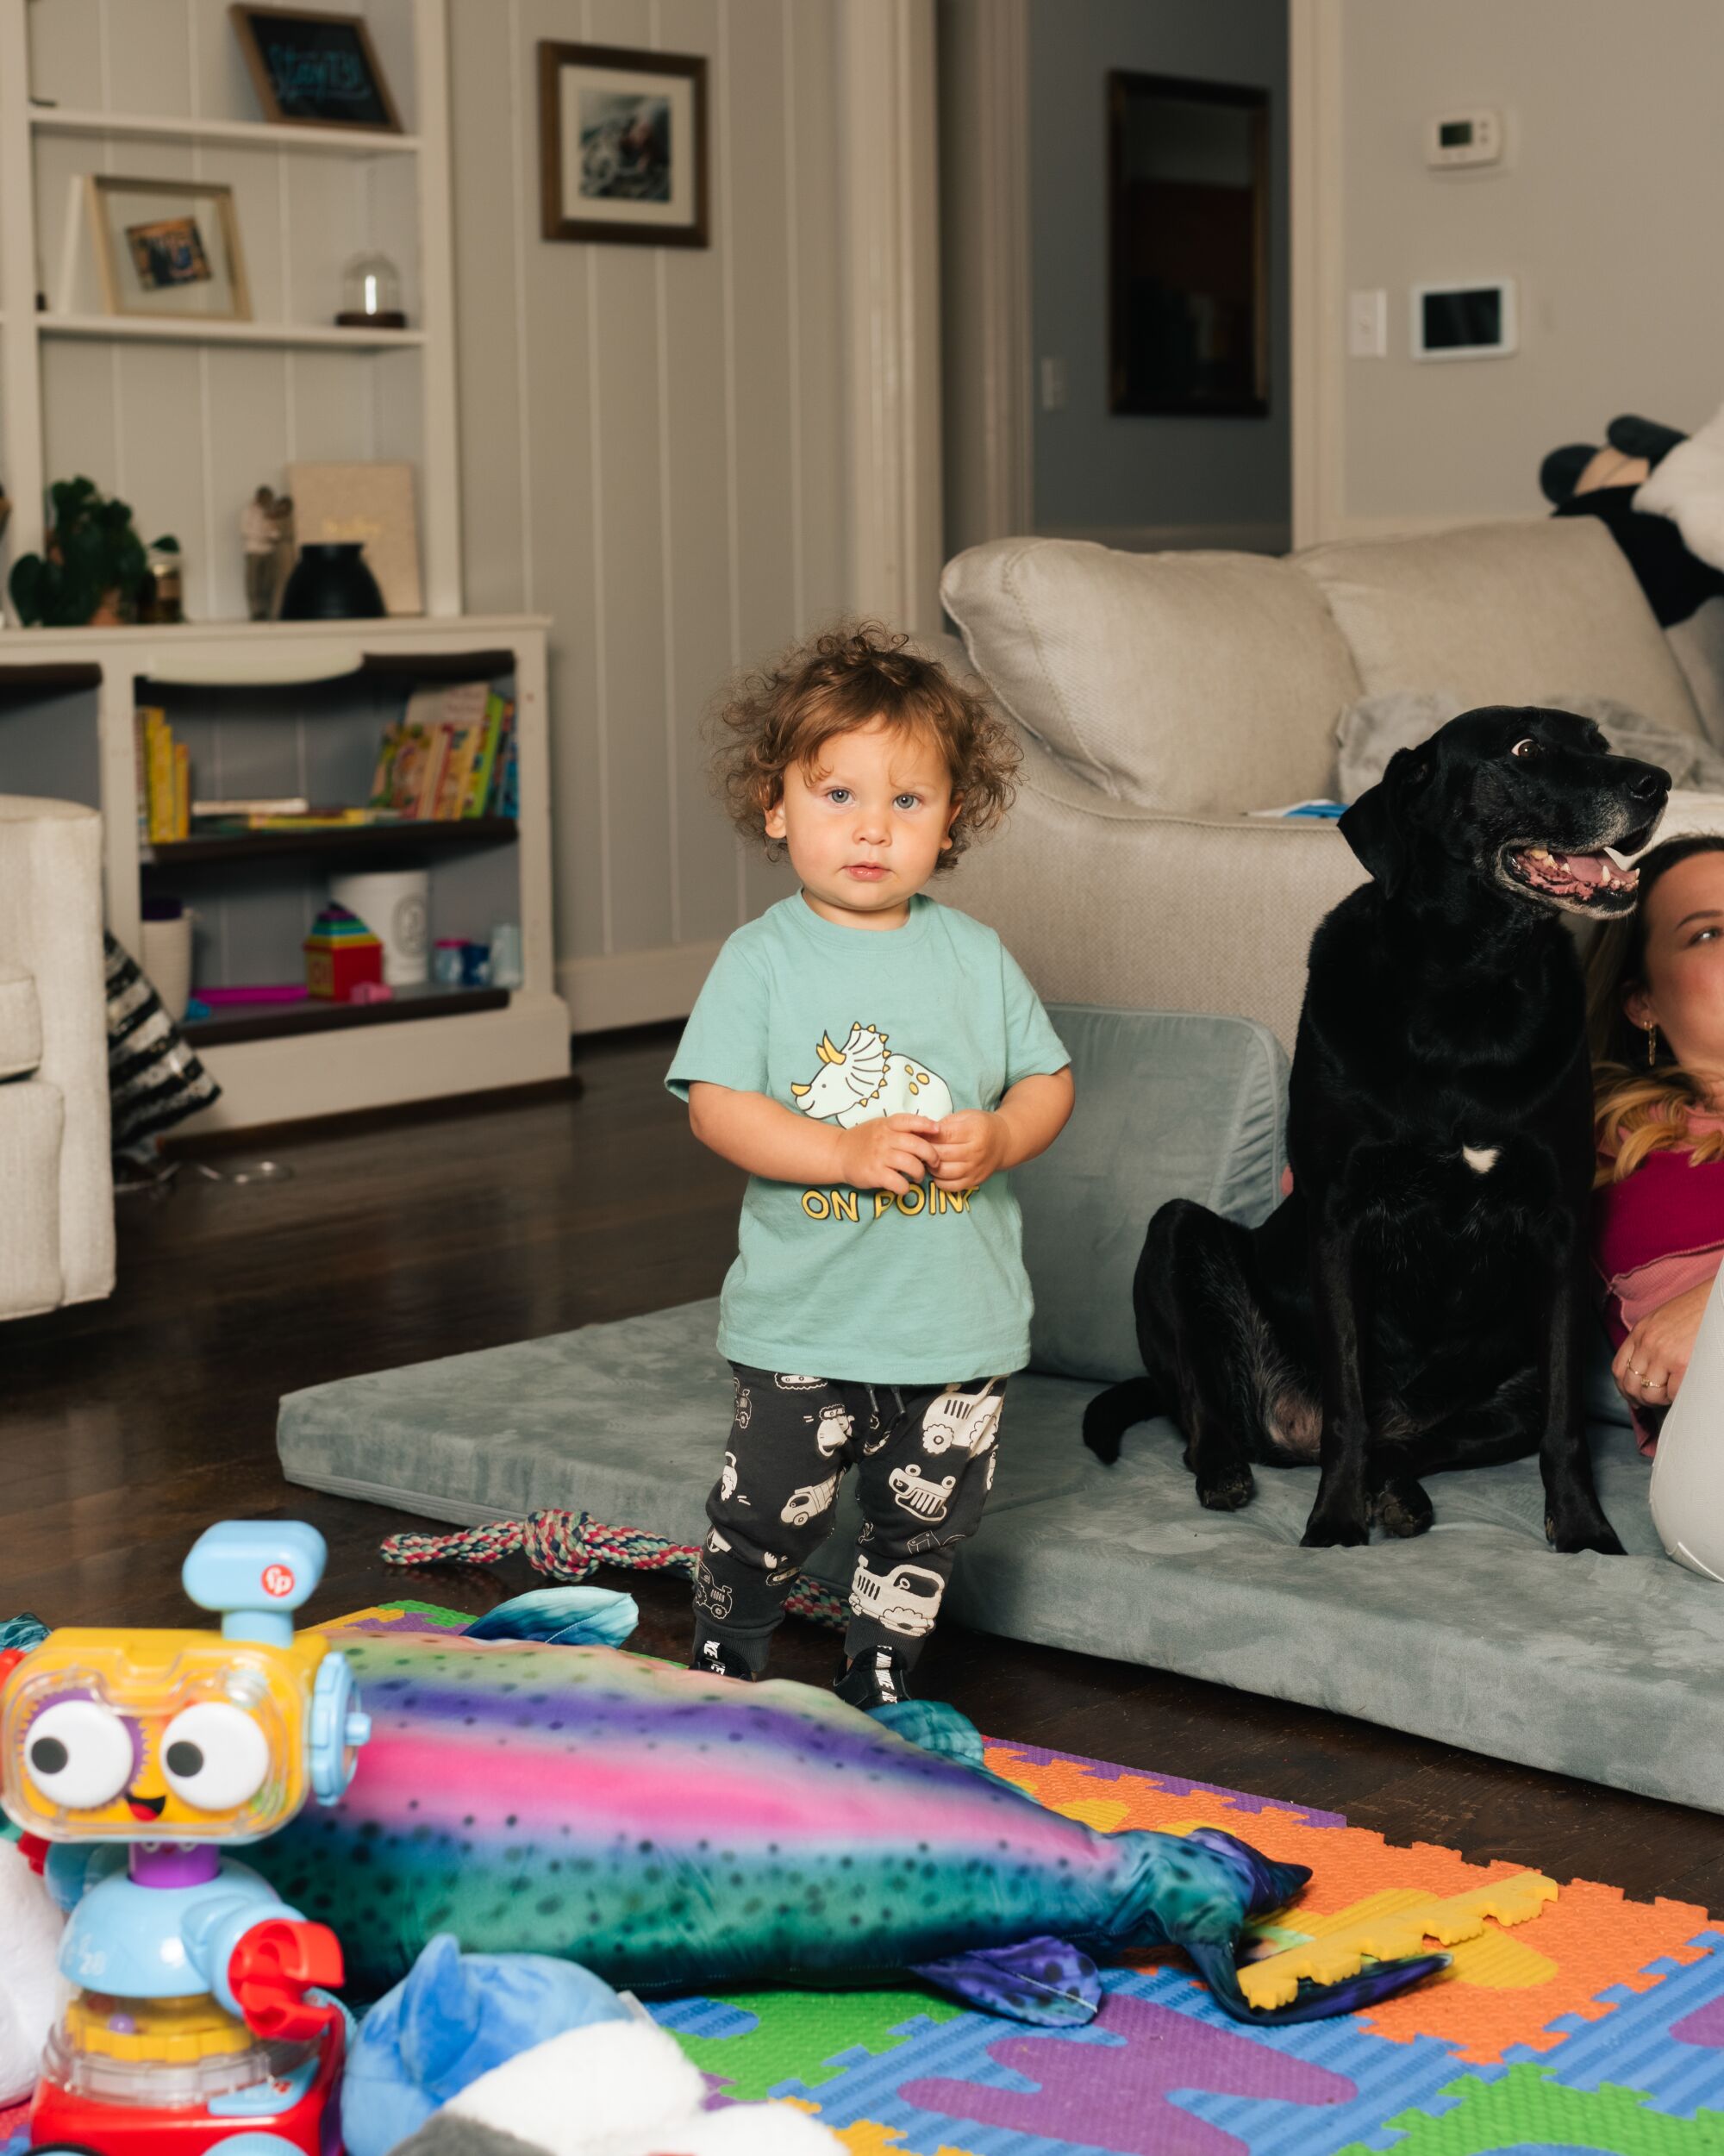 A toddler stands next to a dog and toys.